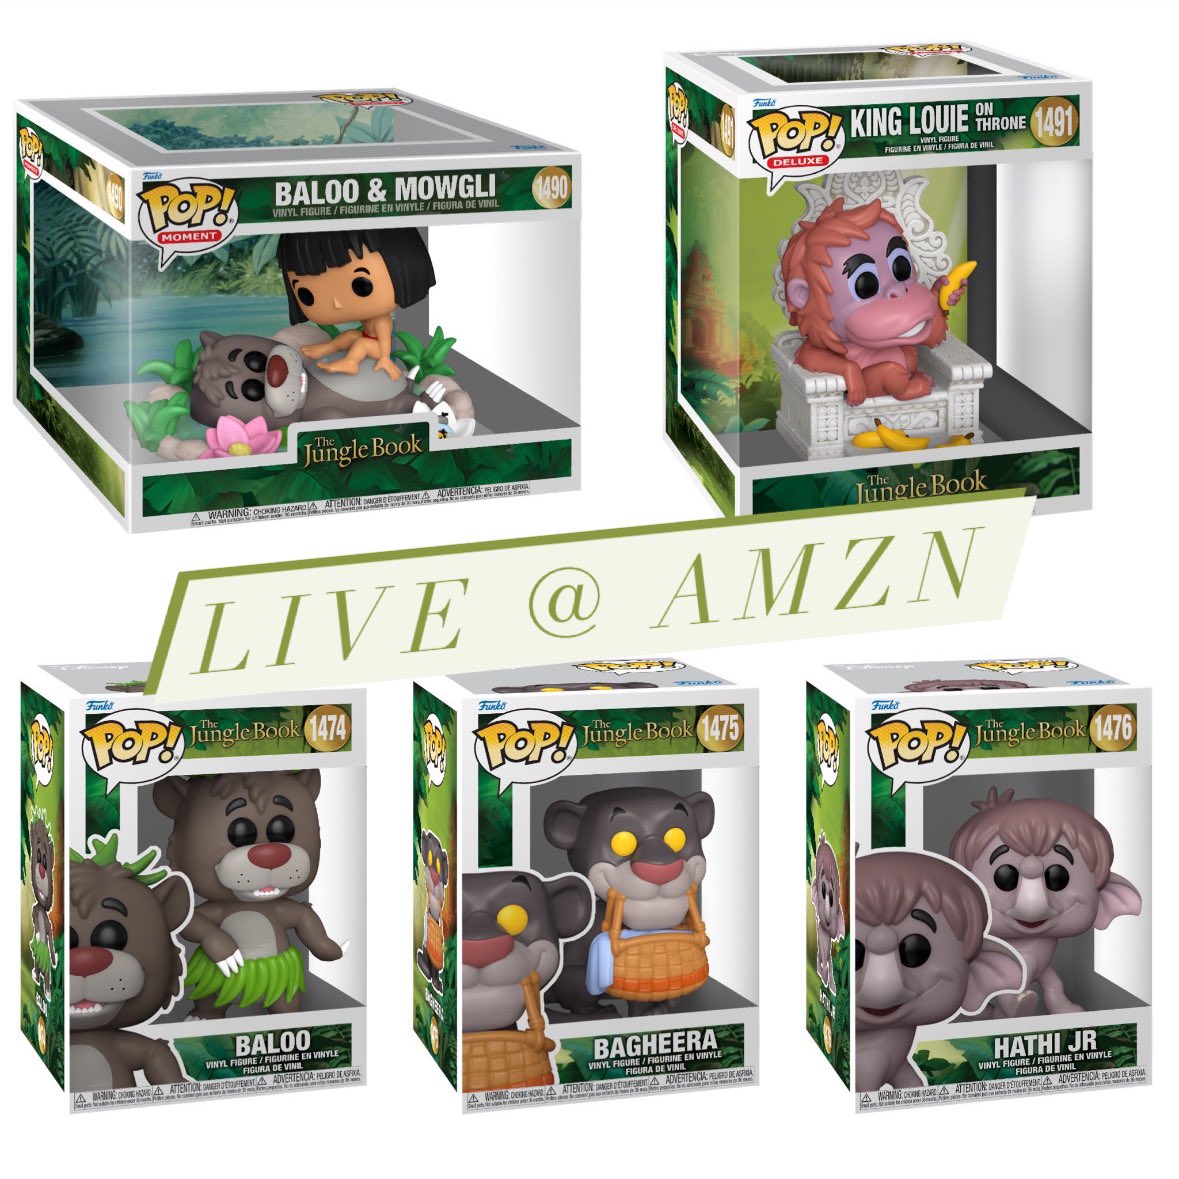 Now live! The new wave of Jungle Book Funko POPs! Hard to pick just one 🤔 head to the link below!
Linky ~ amzn.to/3ymljpt
#Ad #JungleBook #FPN #FunkoPOPNews #Funko #POP #POPVinyl #FunkoPOP #FunkoSoda